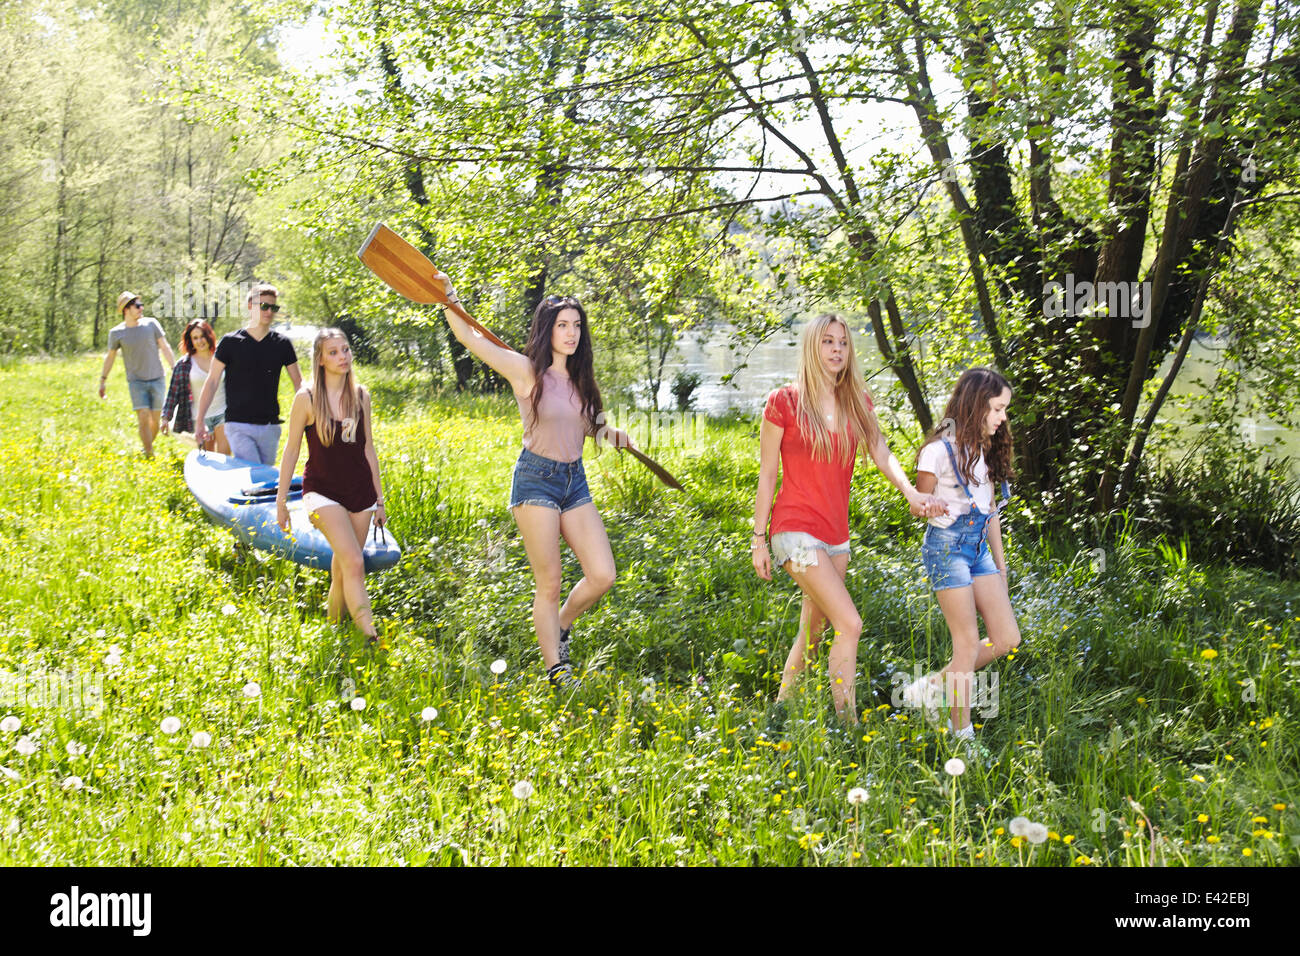 Group of friends walking through grass carrying canoe Stock Photo